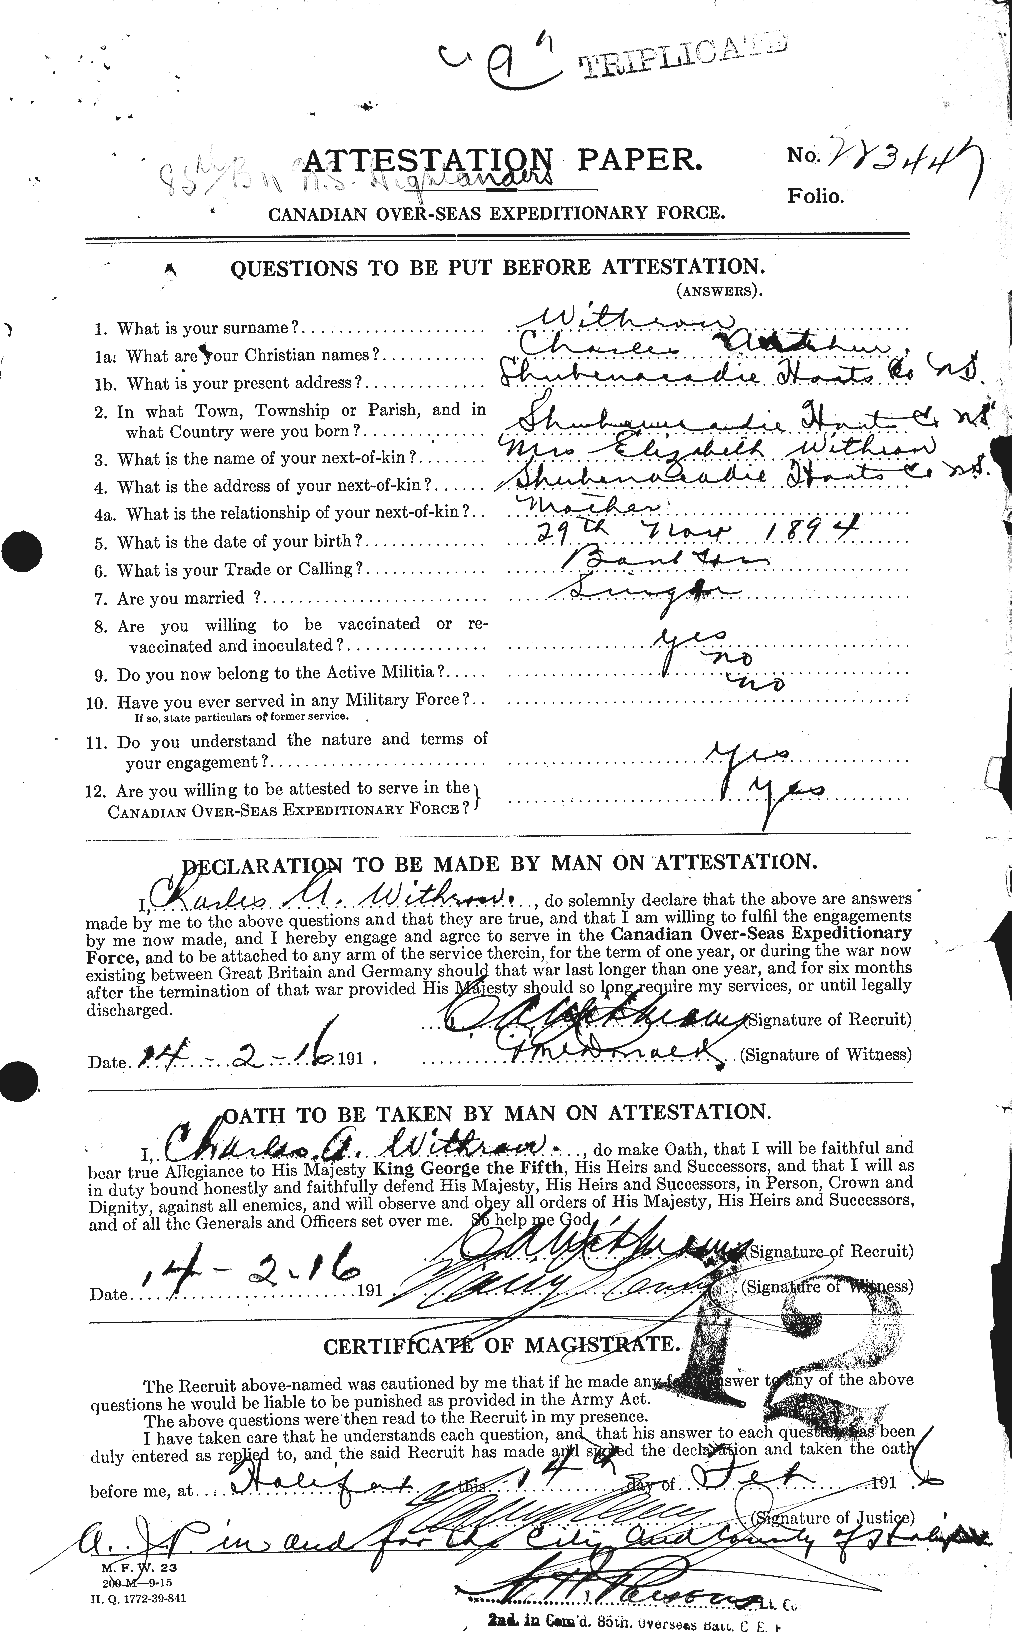 Personnel Records of the First World War - CEF 682087a